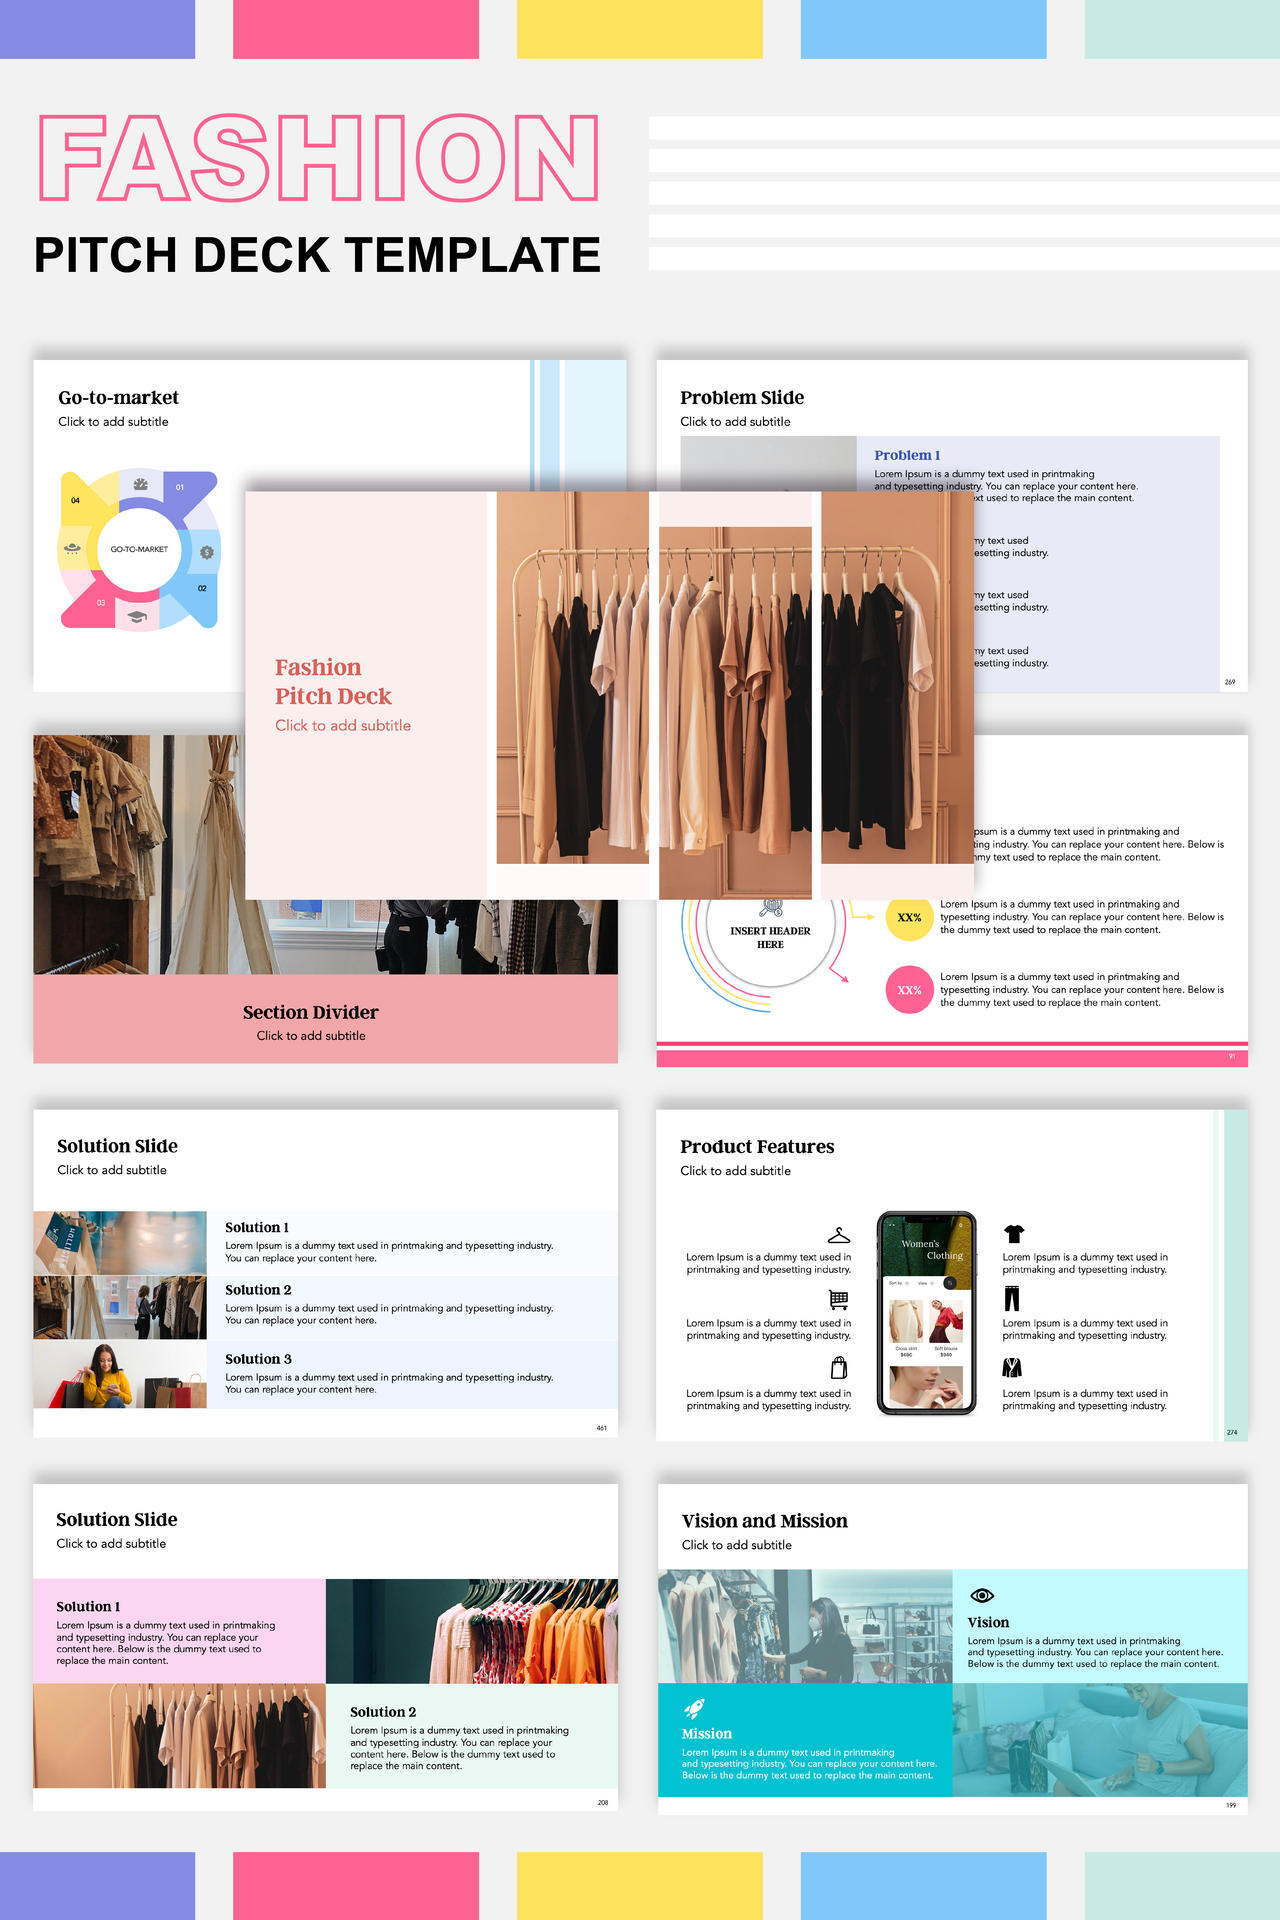 Fashion Pitch Deck Template by airpitchh on DeviantArt